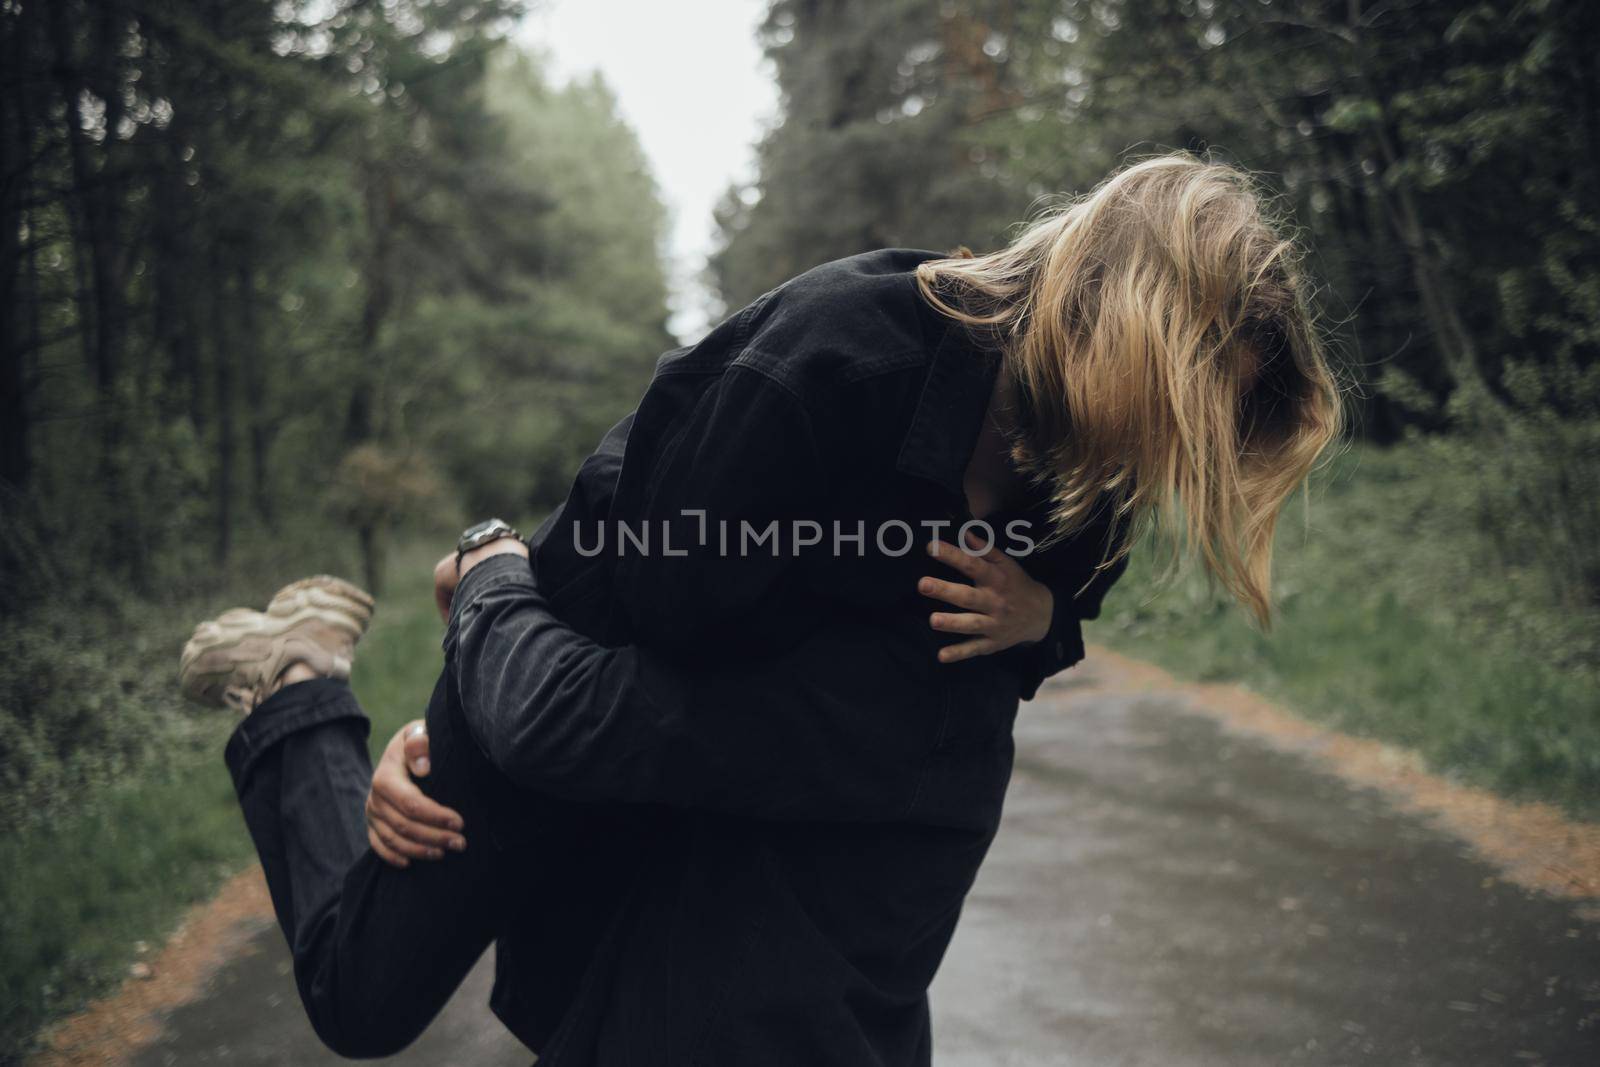 lovers hug in the forest in rainy weather